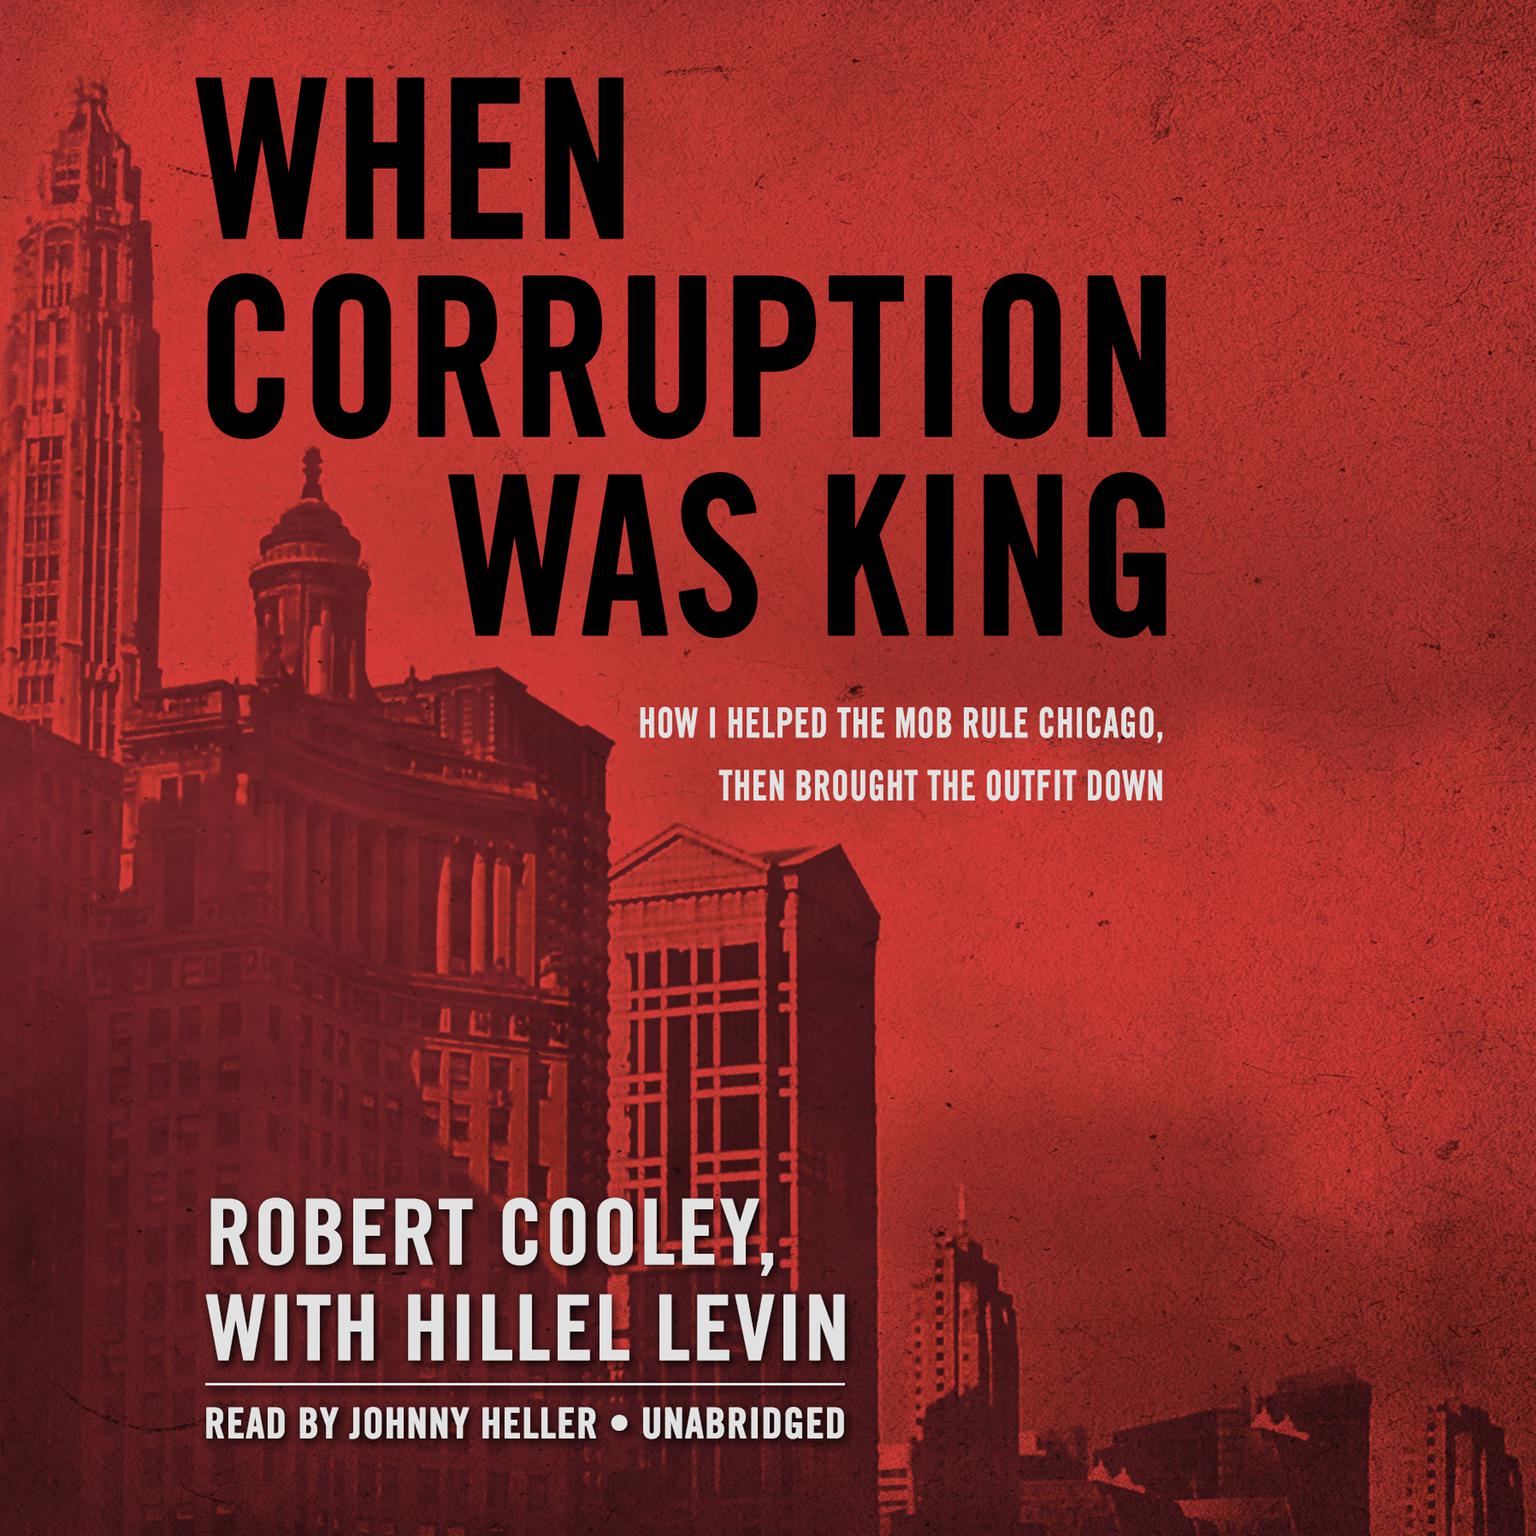 When Corruption Was King: How I Helped the Mob Rule Chicago, Then Brought the Outfit Down Audiobook, by Robert Cooley